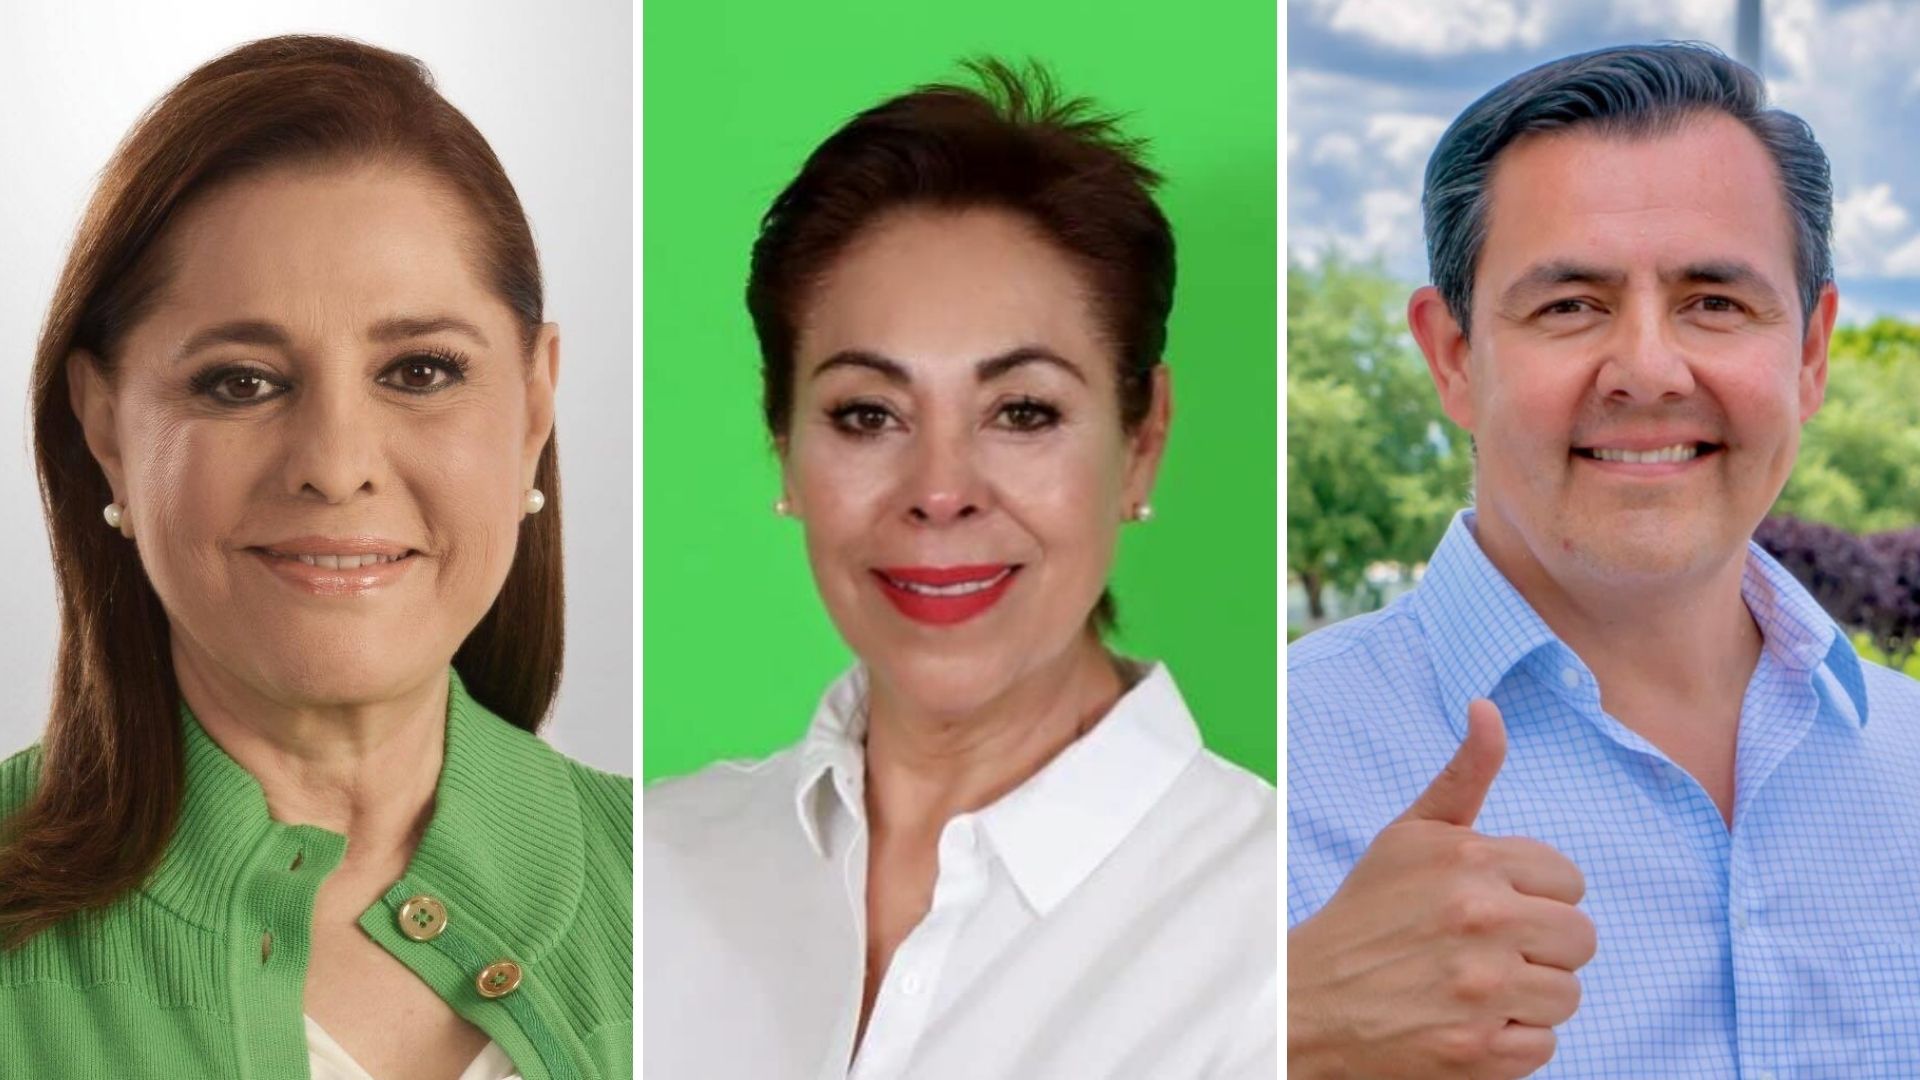 Candidates spend 6.7 mdp on campaign, then decline for Maru Campos